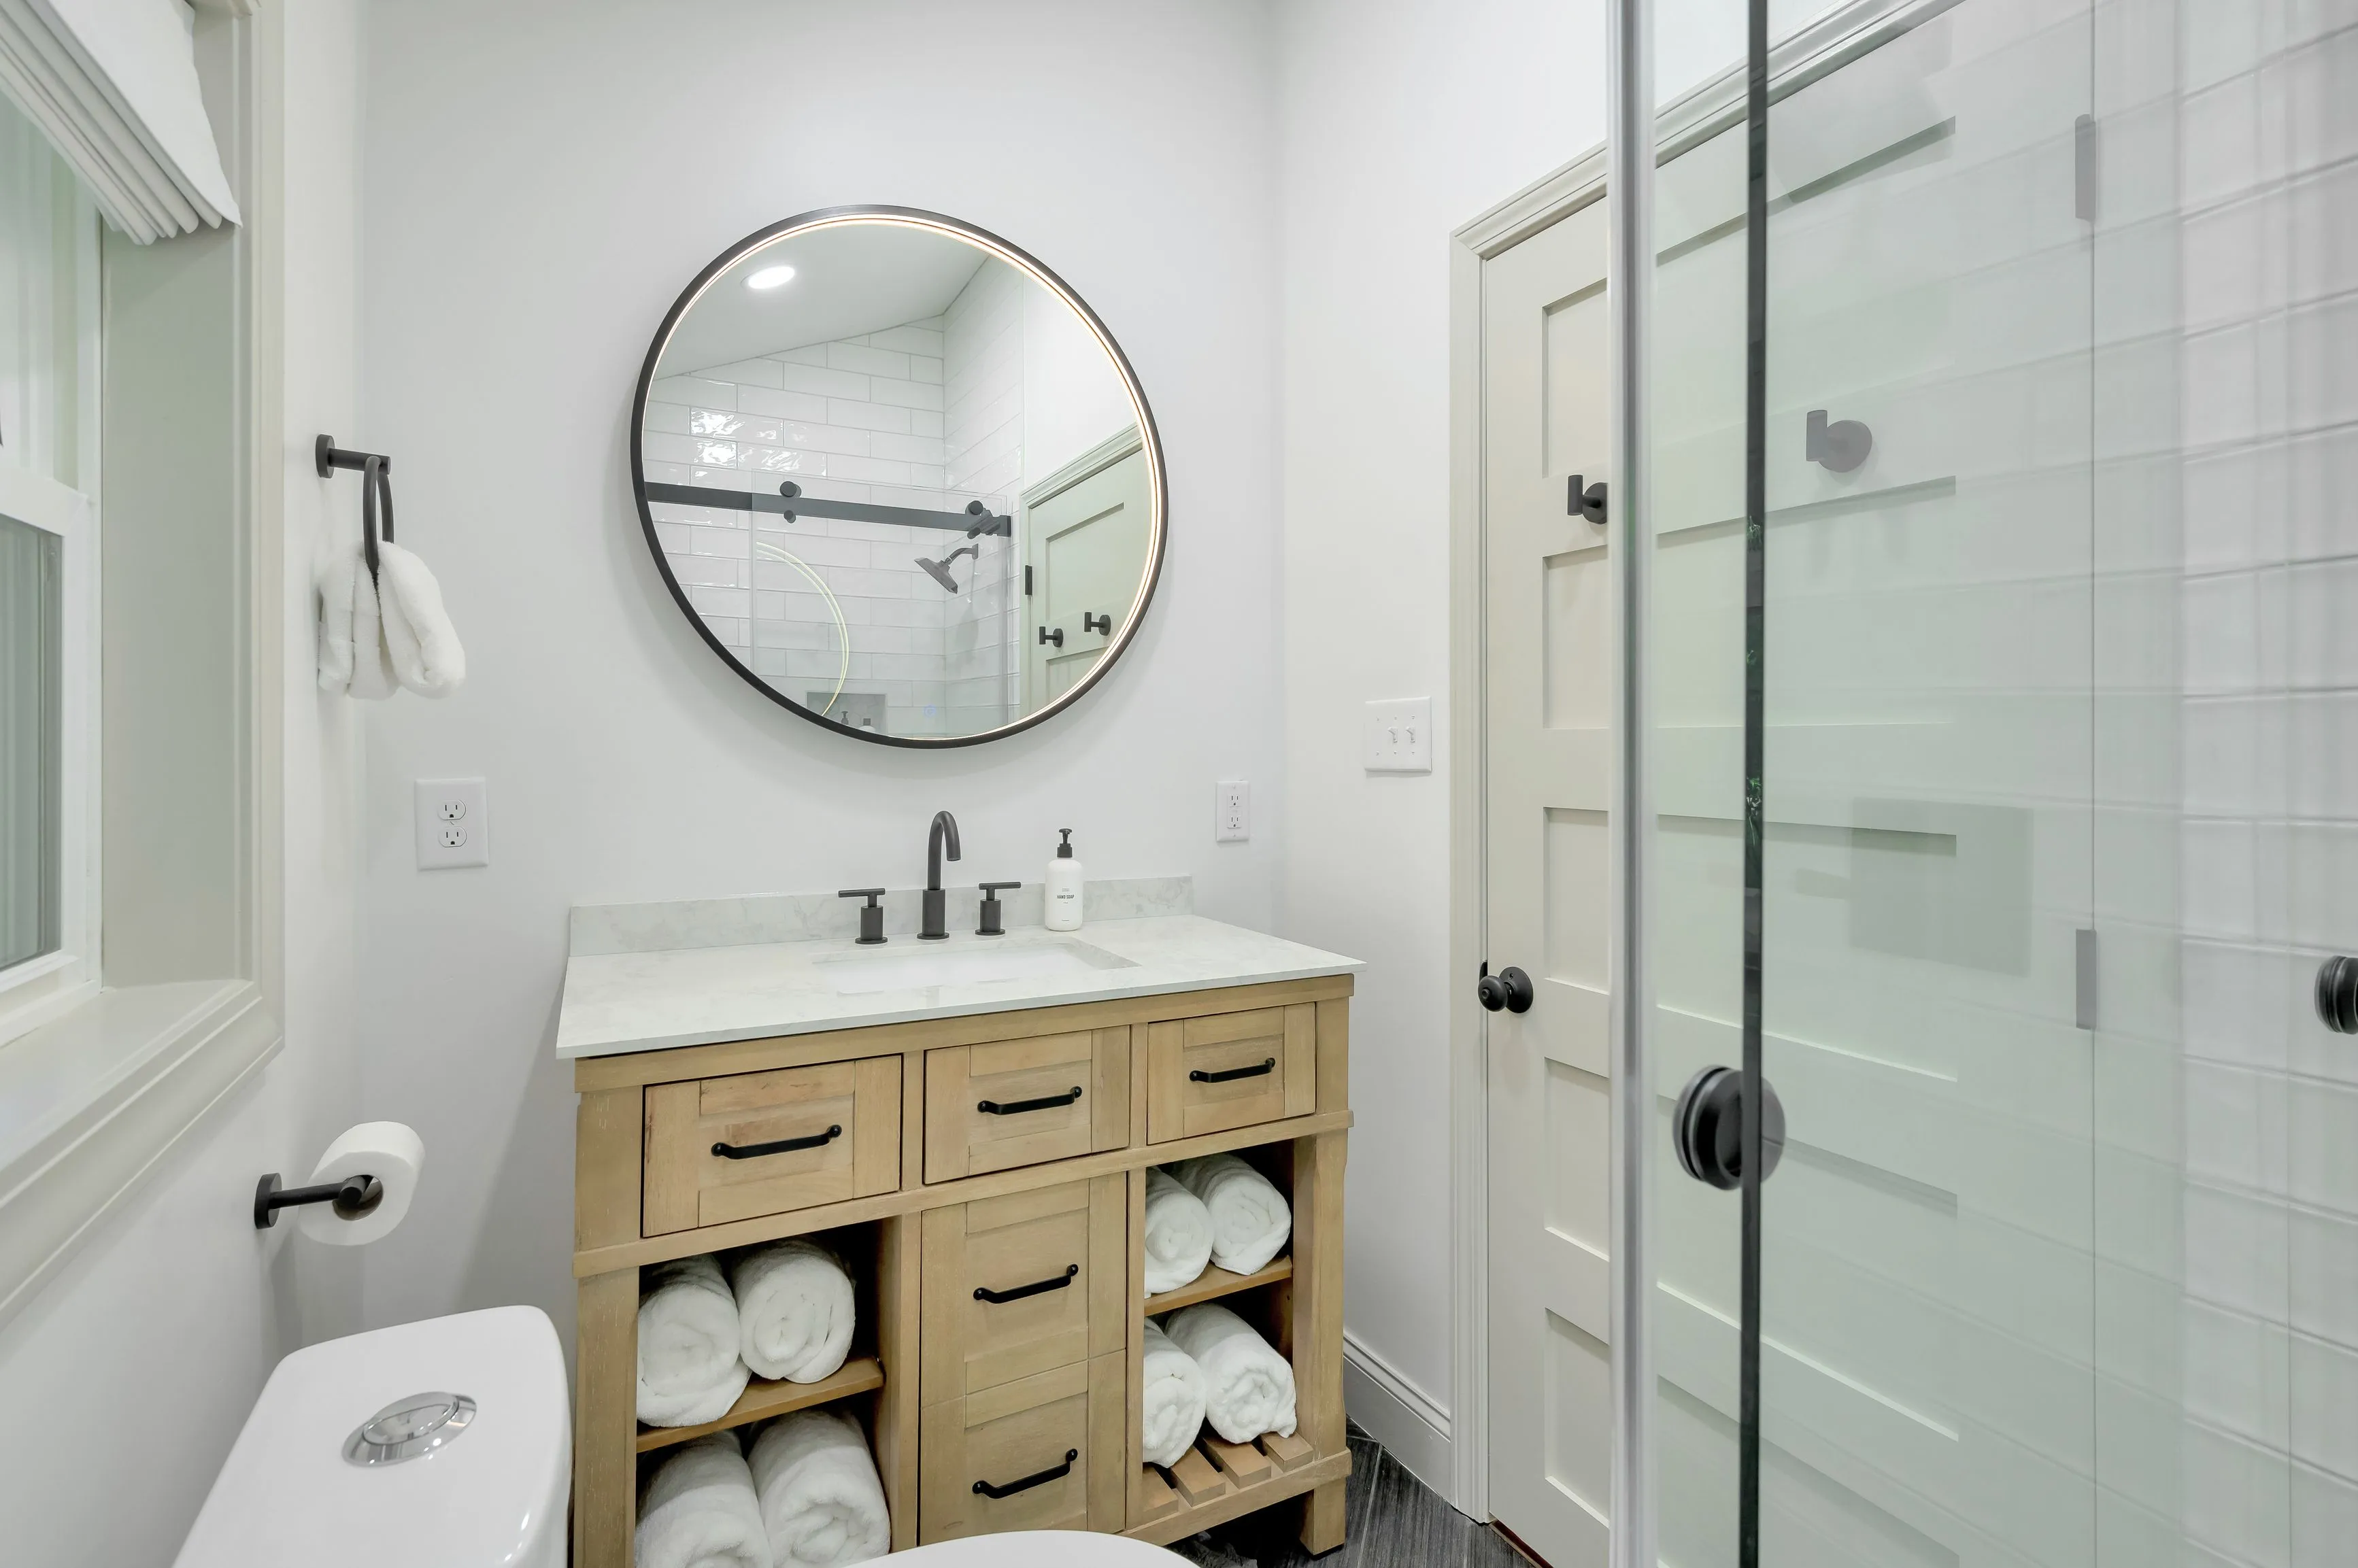 Modern bathroom interior with round mirror, wooden vanity cabinet, white towels, and glass shower enclosure.